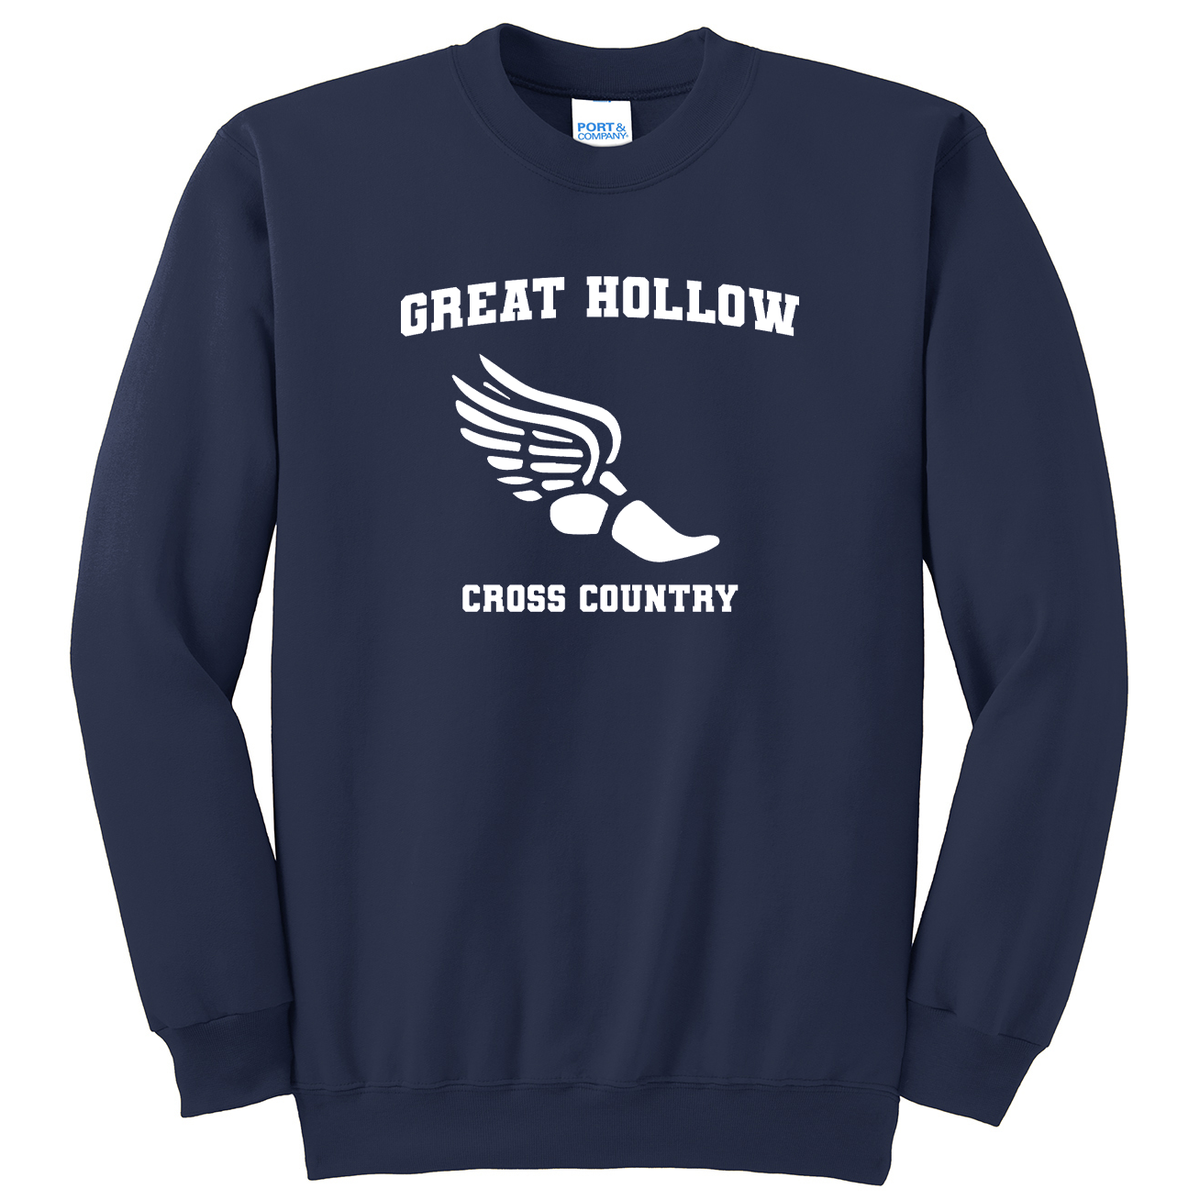 Great Hollow Cross Country Crew Neck Sweater